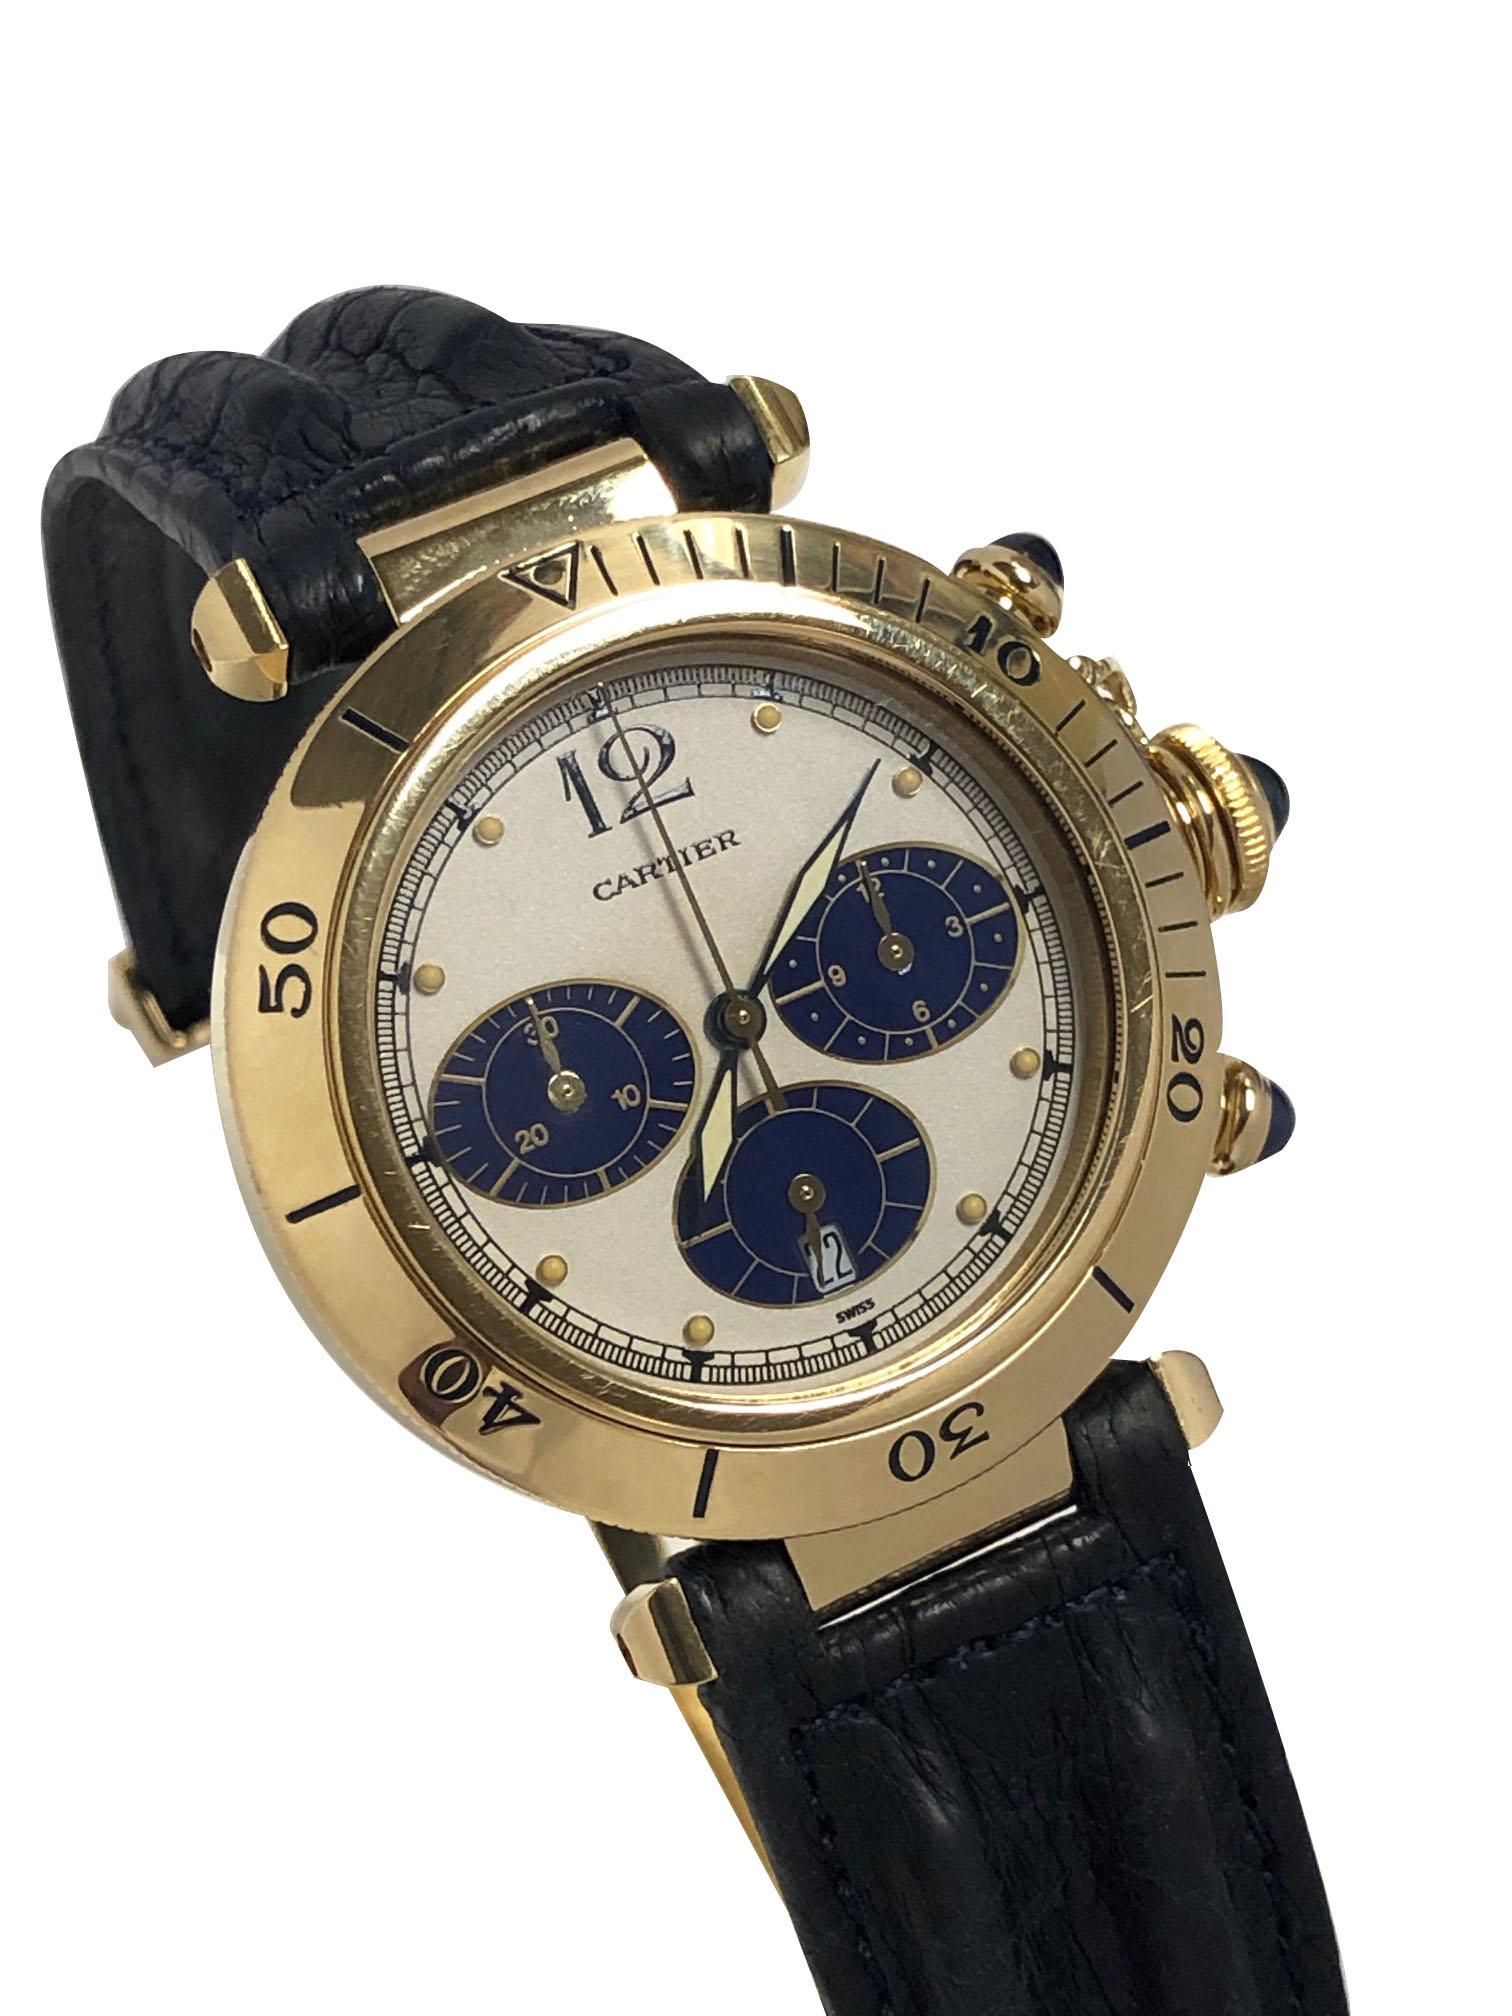 Circa 2000 Cartier, Pasha De Cartier Wrist watch, 38 M.M. 18K yellow Gold 3 piece water resistant case, quartz movement, Chronograph timing functions , water resistant lock down Sapphire crown and Sapphire Chronograph Crowns. White dial with Blue